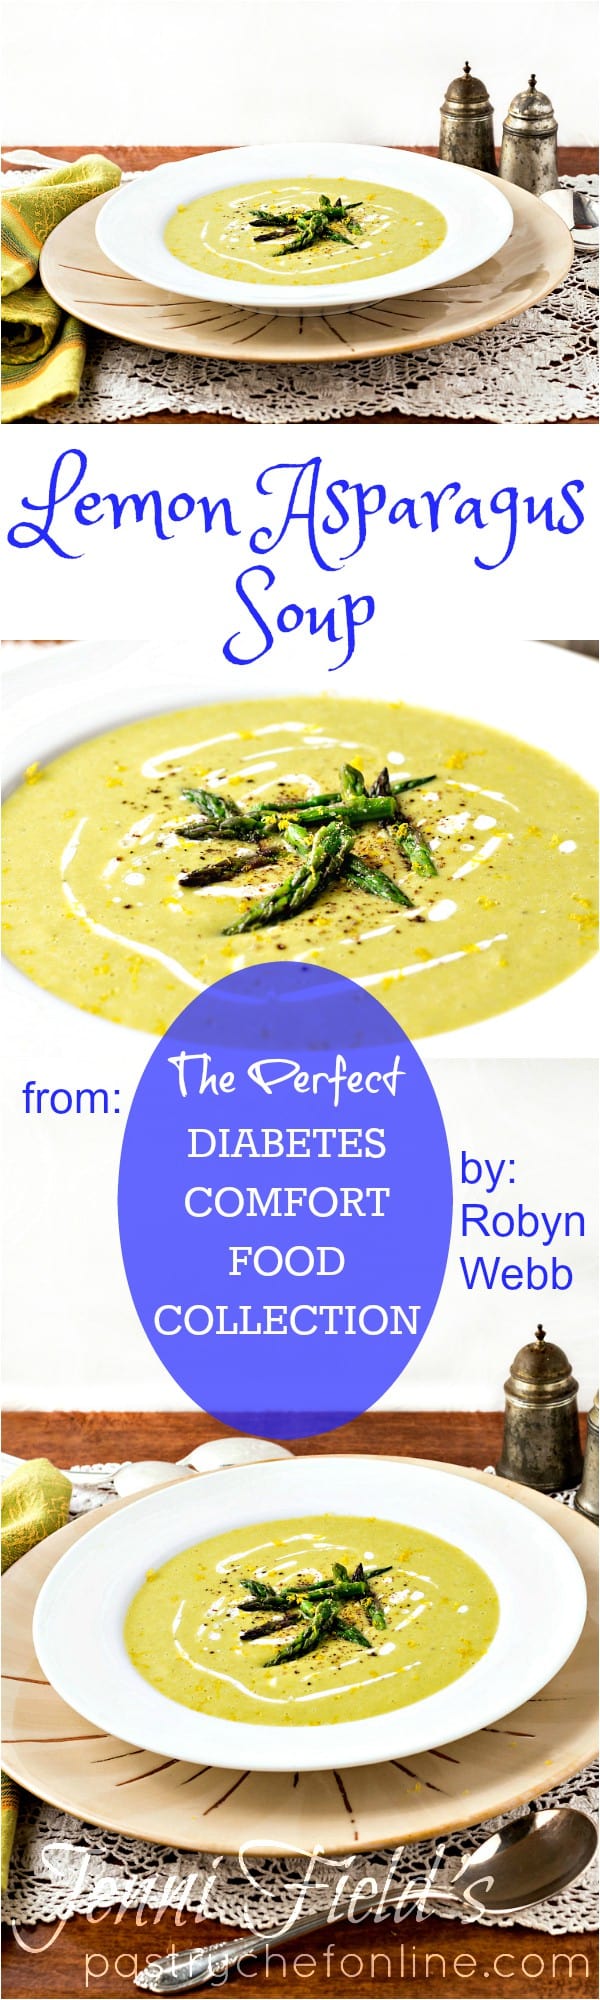 Lemon asparagus soup in a white bowl, garnished with asparagus tips. Text reads "from: the perfect diabetes comfort food collection by Robyn Webb".